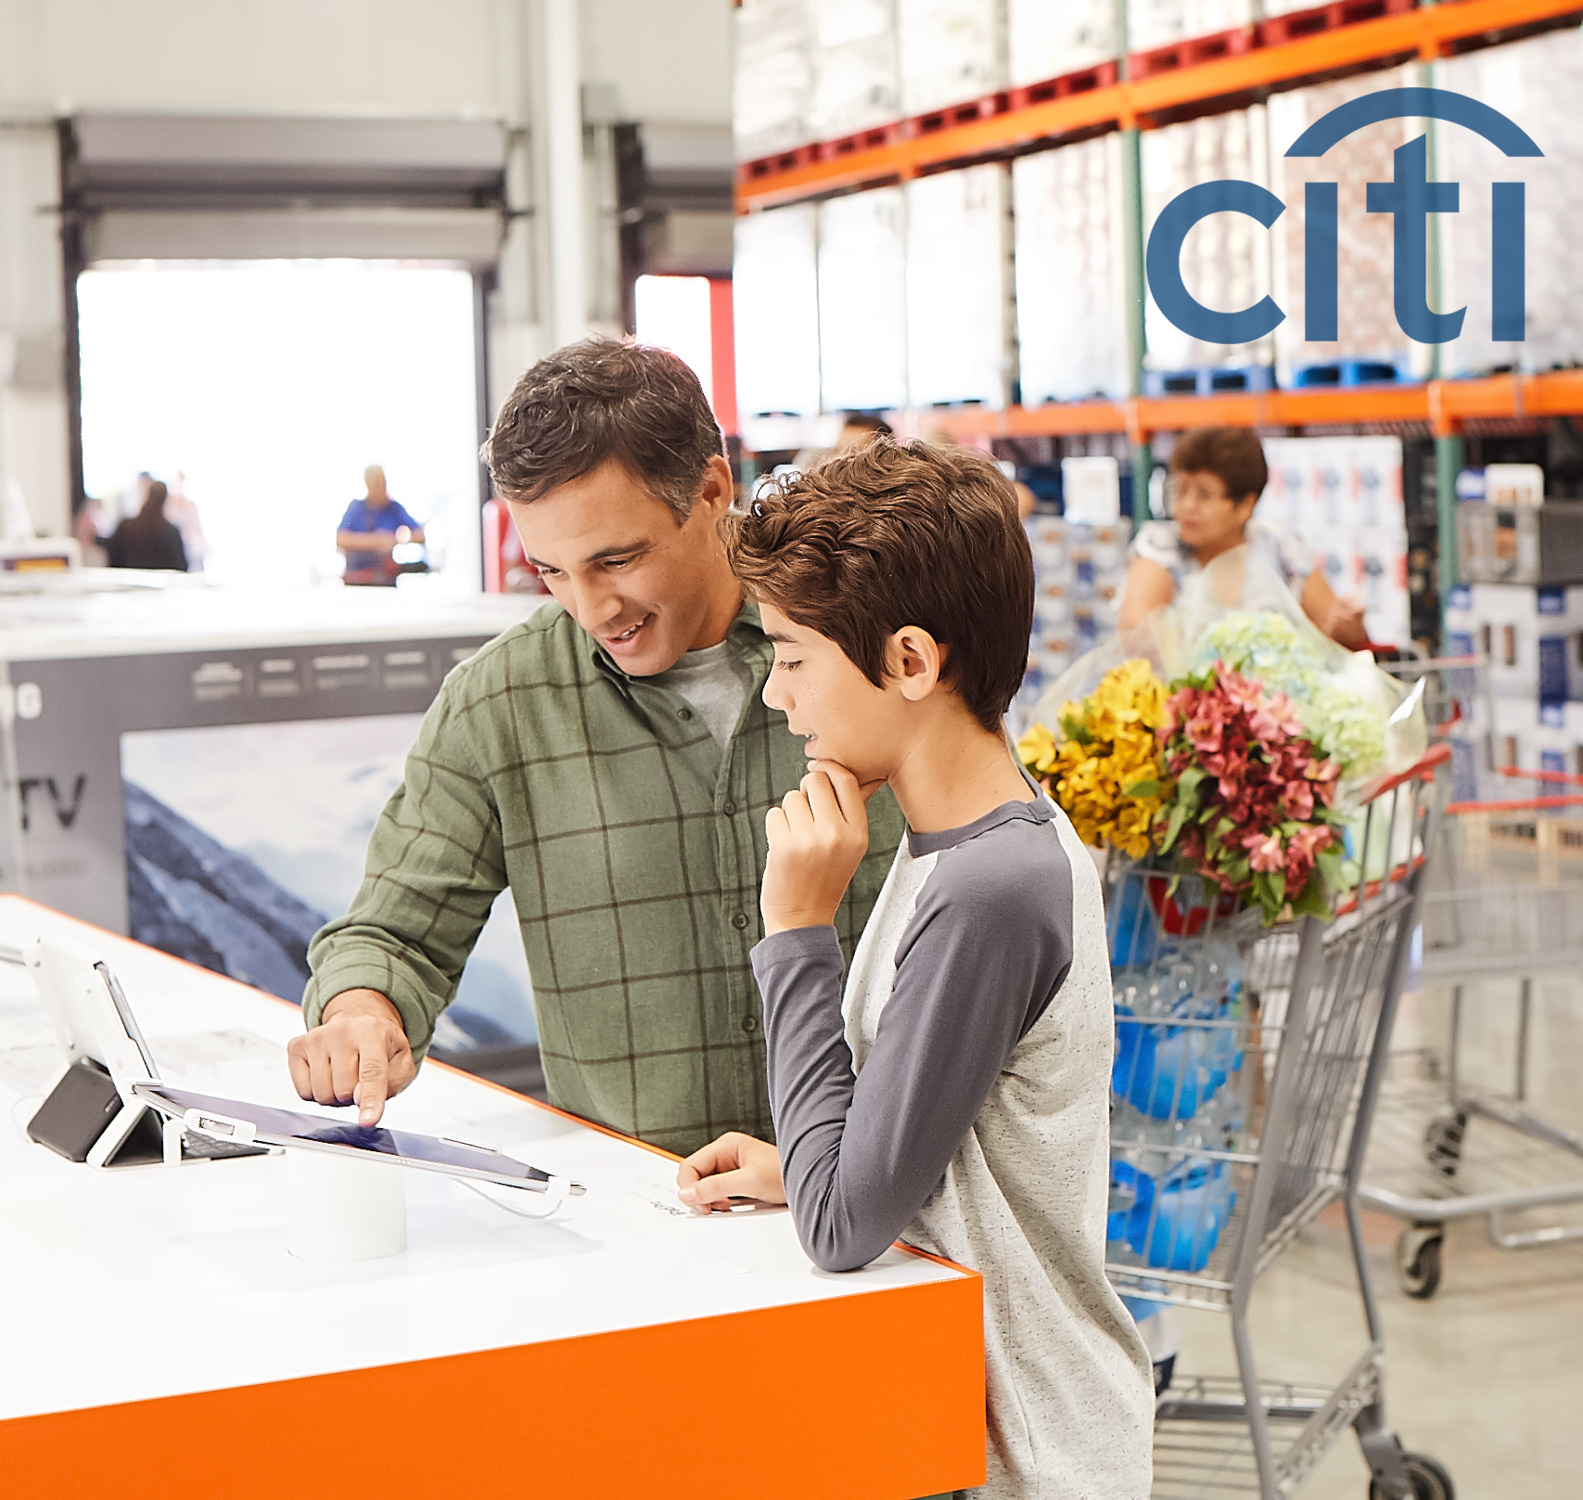 A father and his son look at iPads at Costco in a Citibank Ad Campaign photographed by Lifestyle Photographer Diana Mulvihill